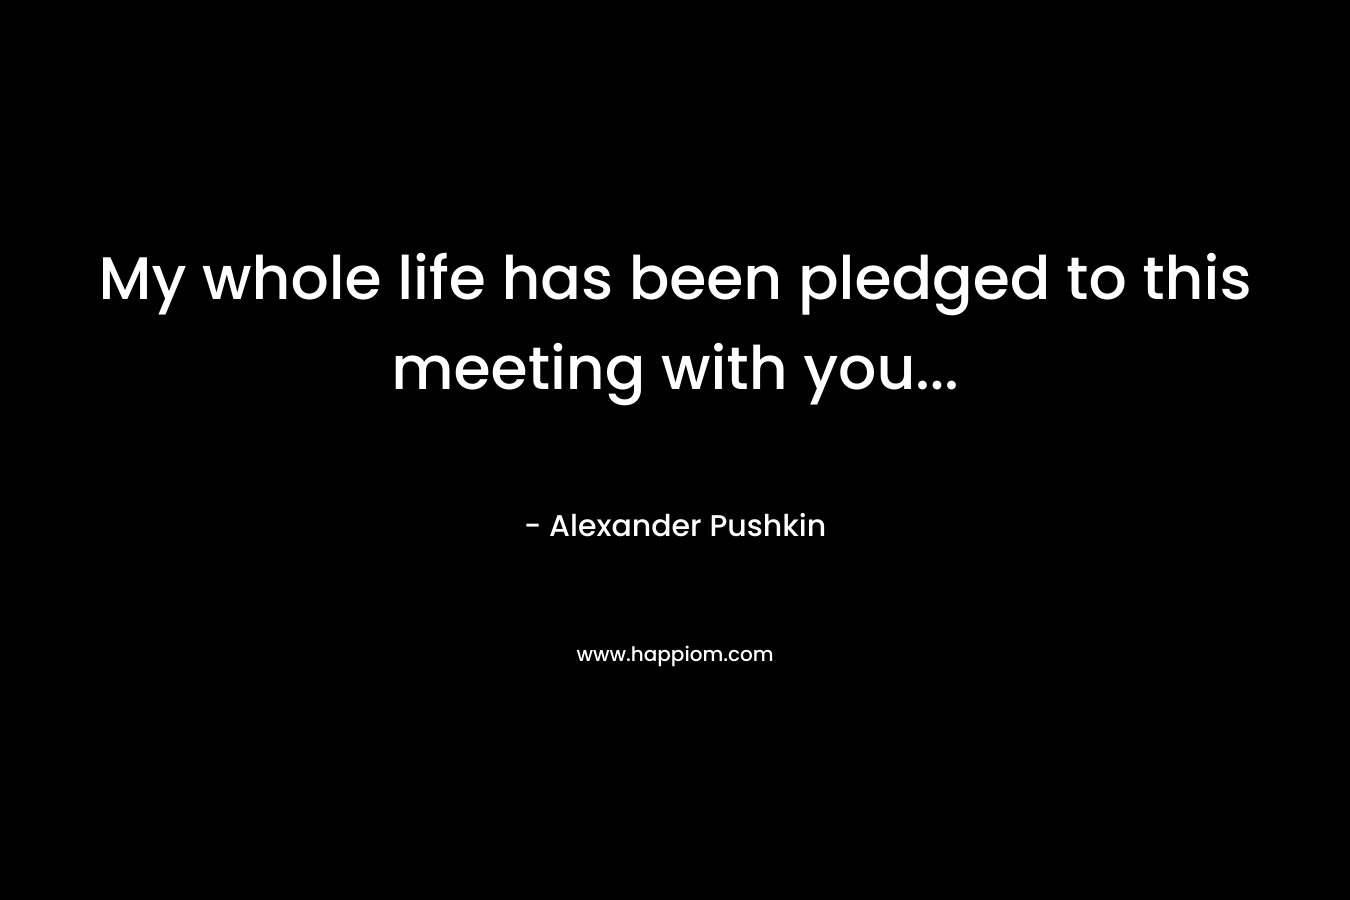 My whole life has been pledged to this meeting with you...